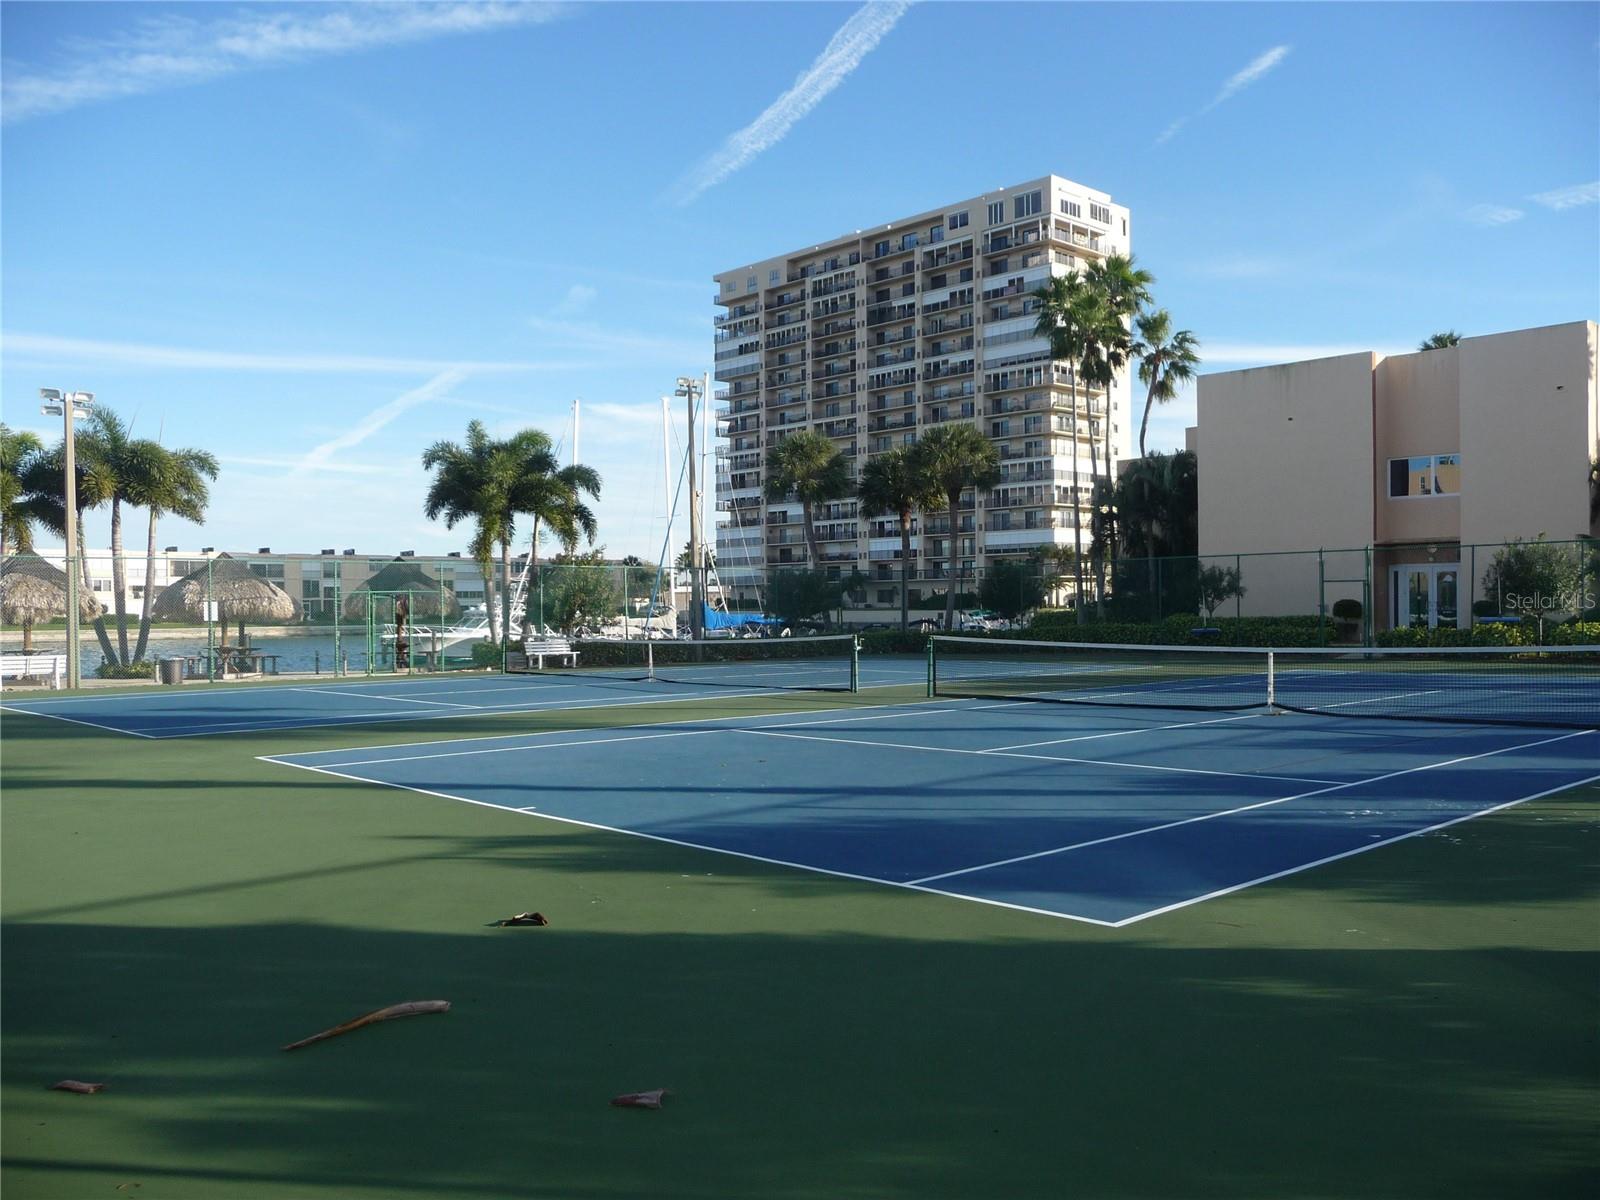 Tennis courts on property.